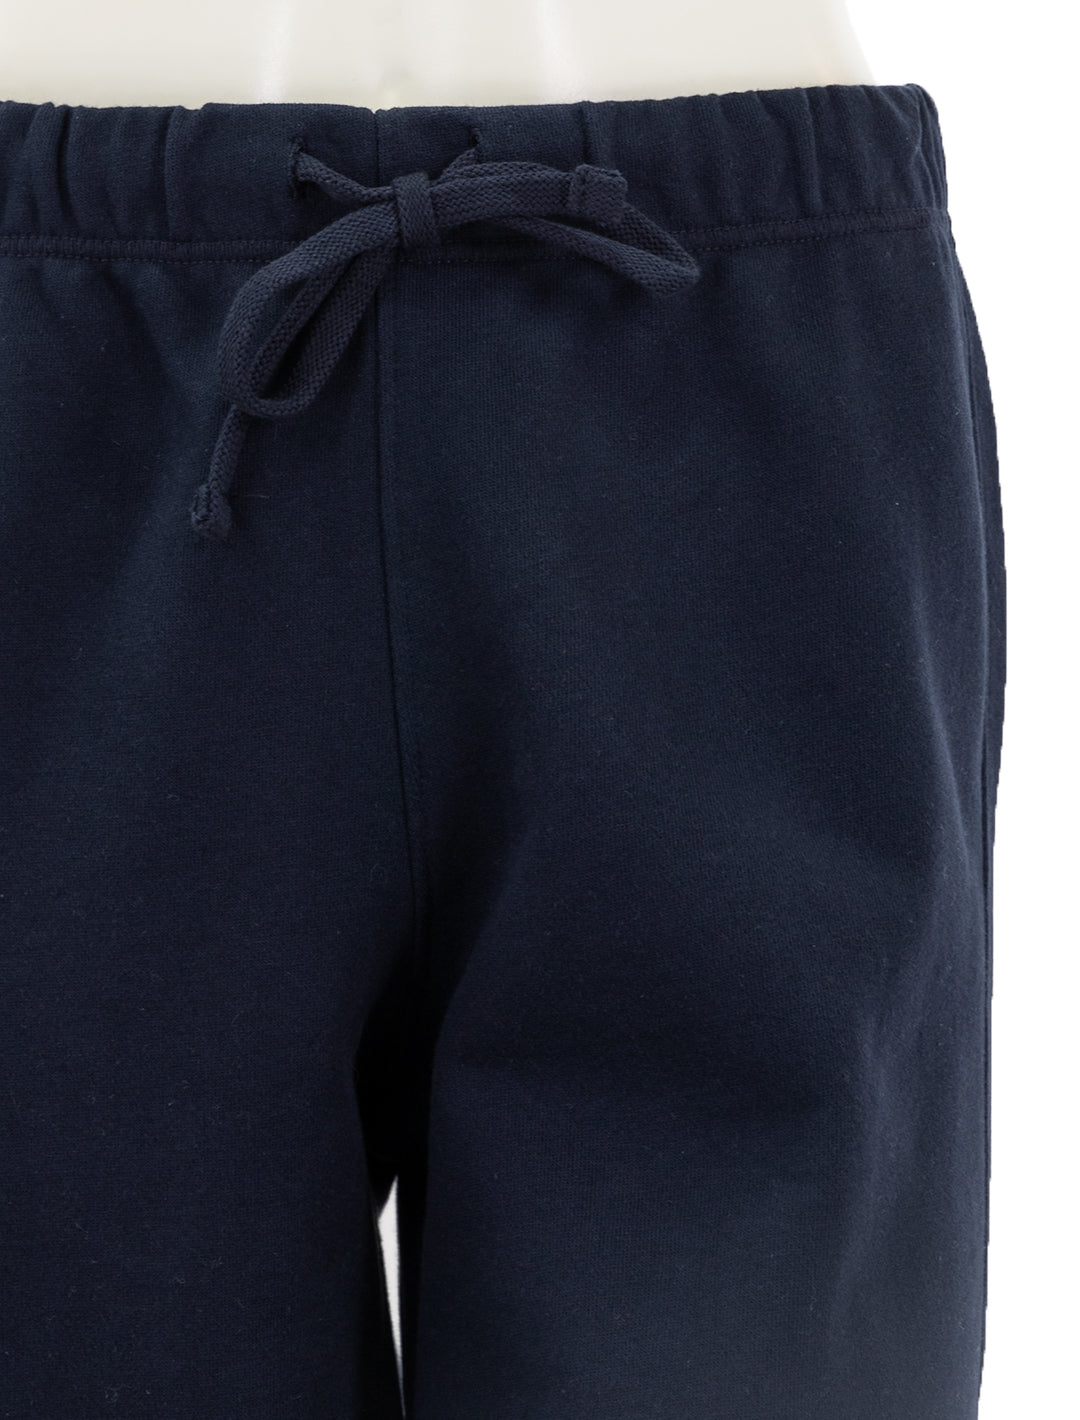 Close-up view of Splendid's cassie terry pant in navy.